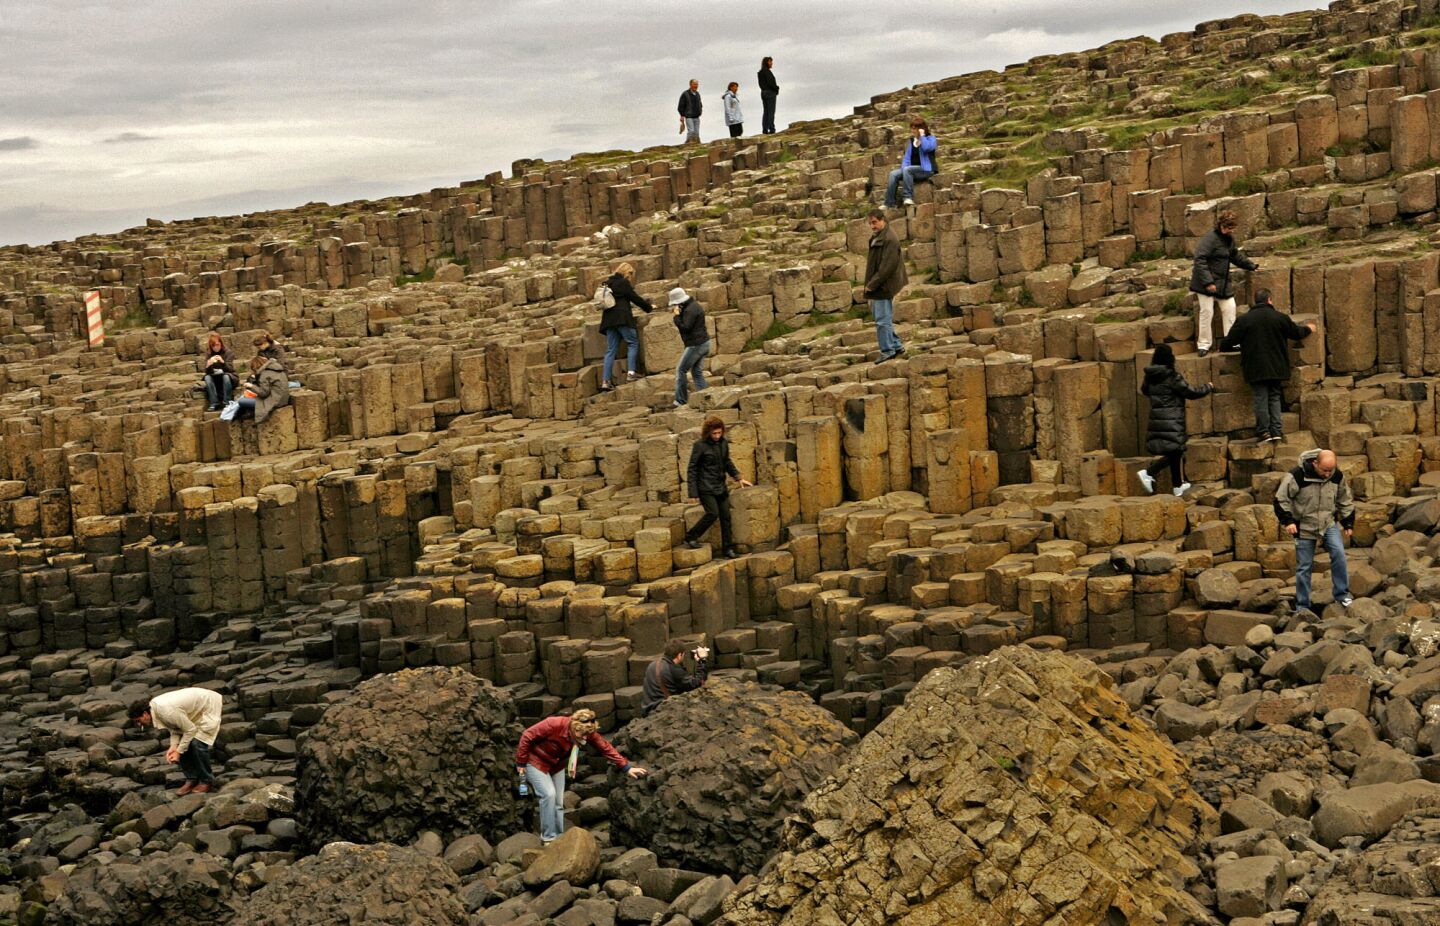 The Giant's Causeway, at the foot of basalt cliffs in Northern Ireland, is made up of 40,000 black basalt columns jutting out of the ocean. Volcanic activity 50 million to 60 million years ago created these step-like columns on the edge of the Antrim plateau.